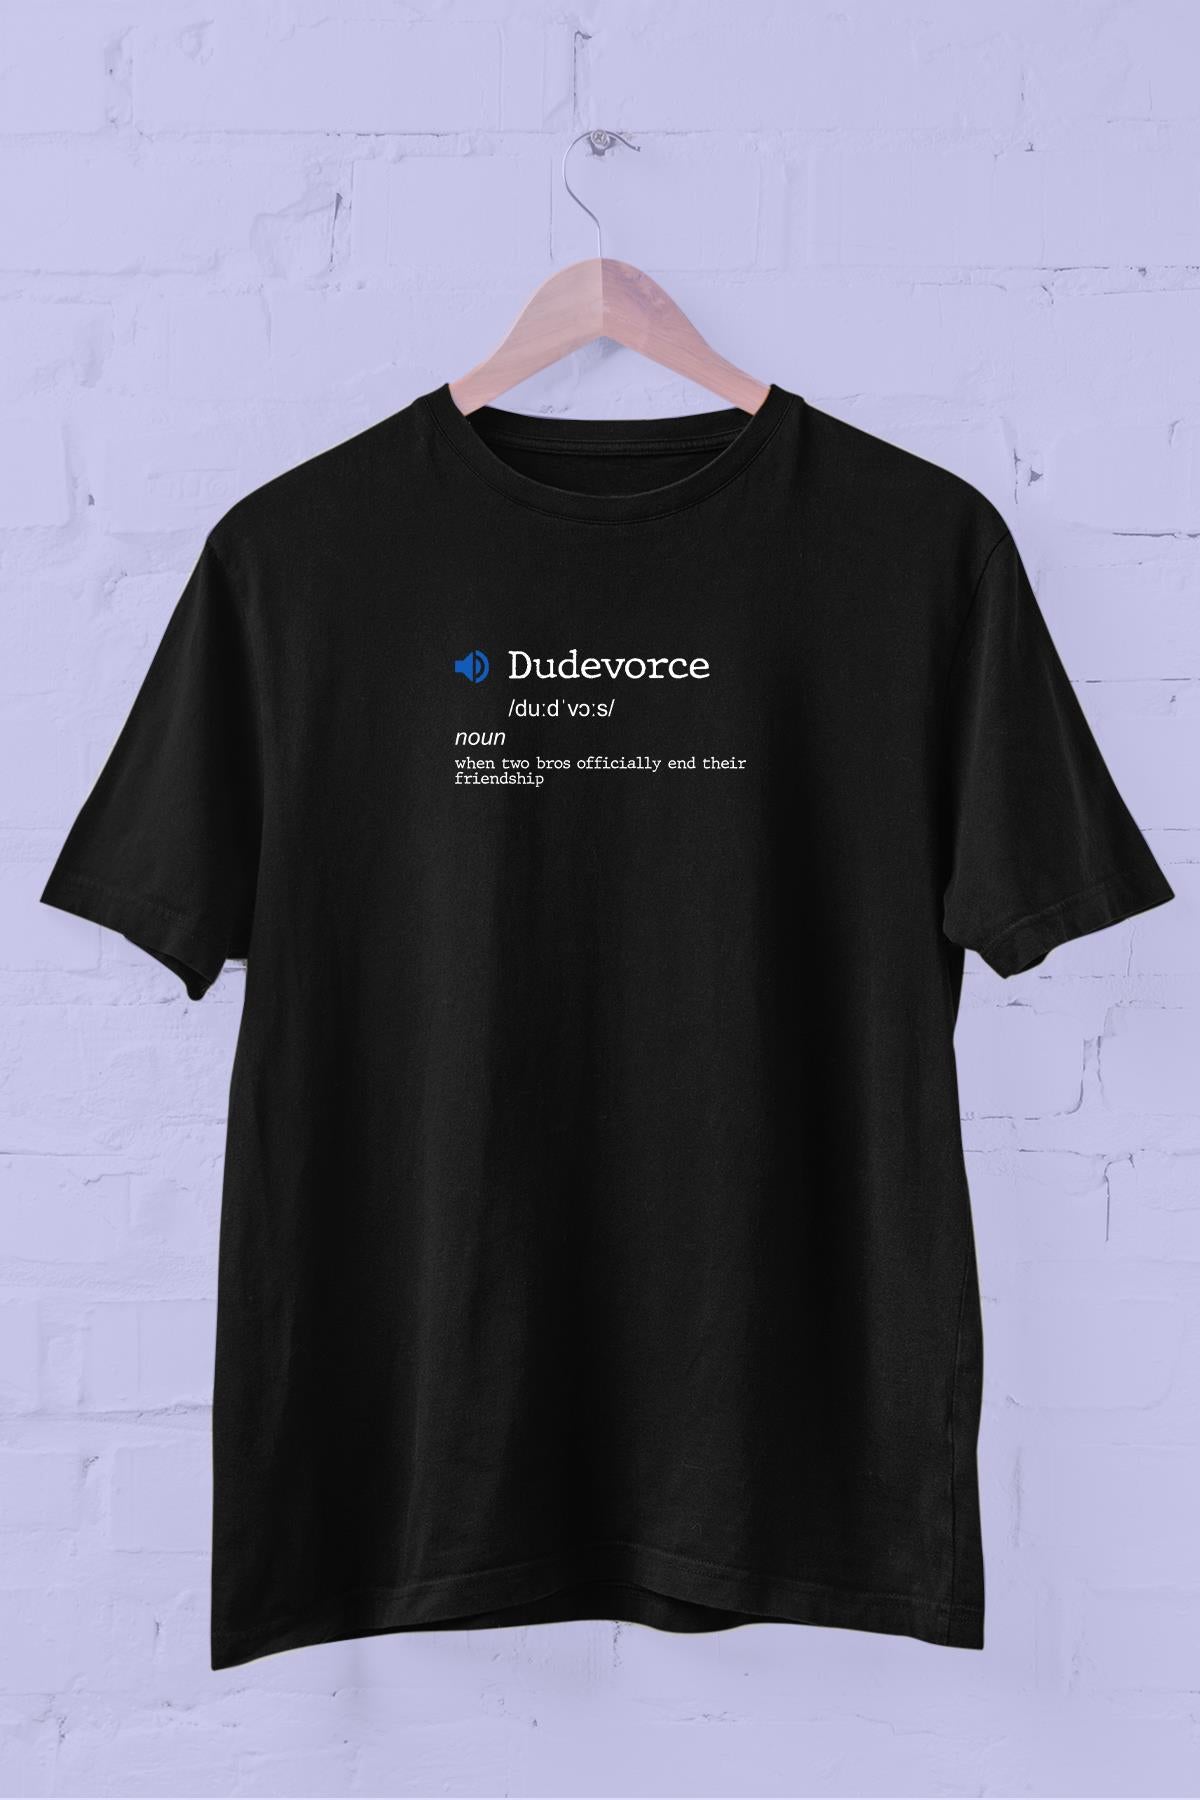 Dictionary of Fabricated Words "Duddevorce" printed Crew Neck men's t -shirt